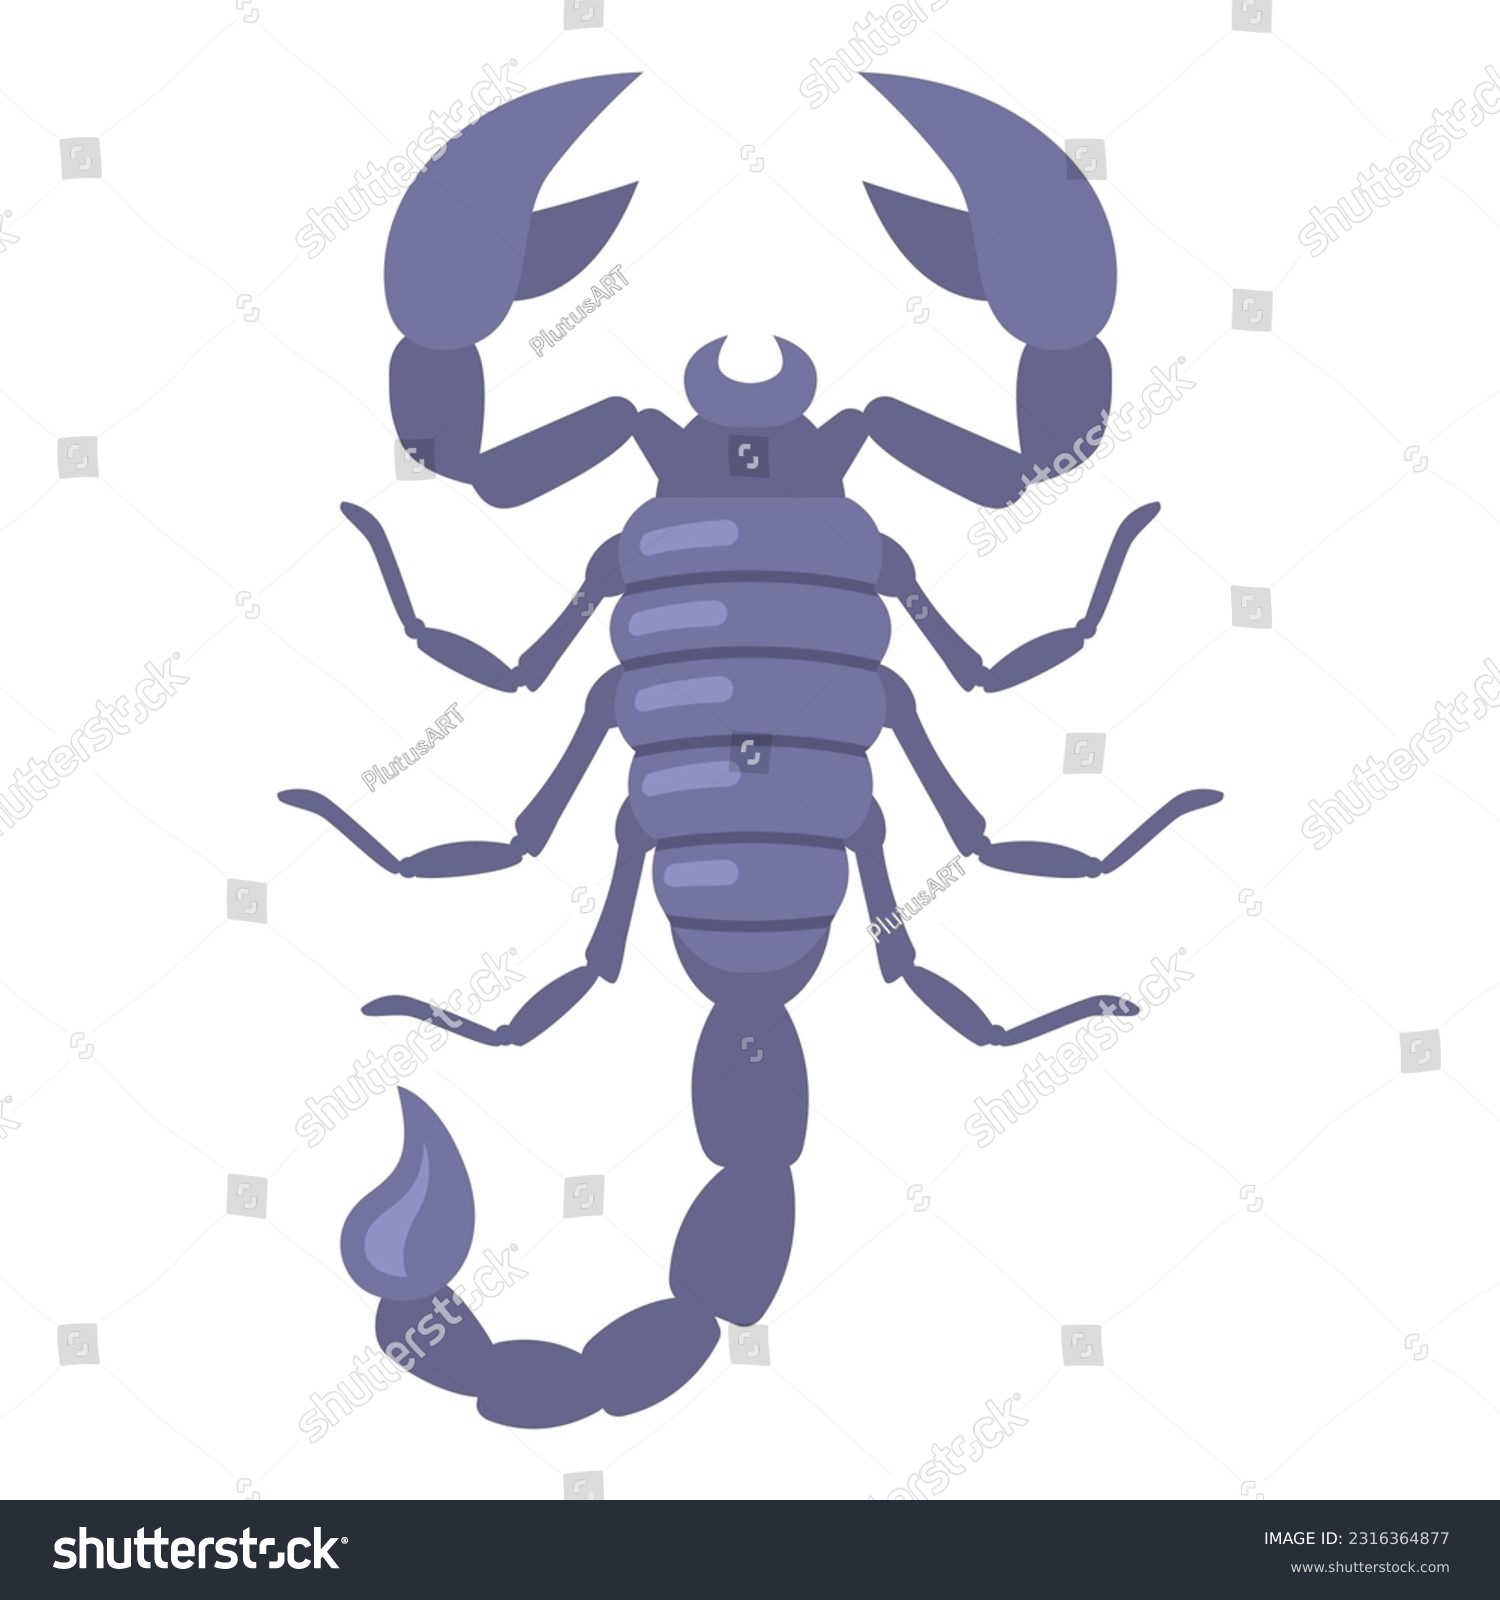 SVG of gray scorpion with large claws on a white background. flat vector illustration. svg